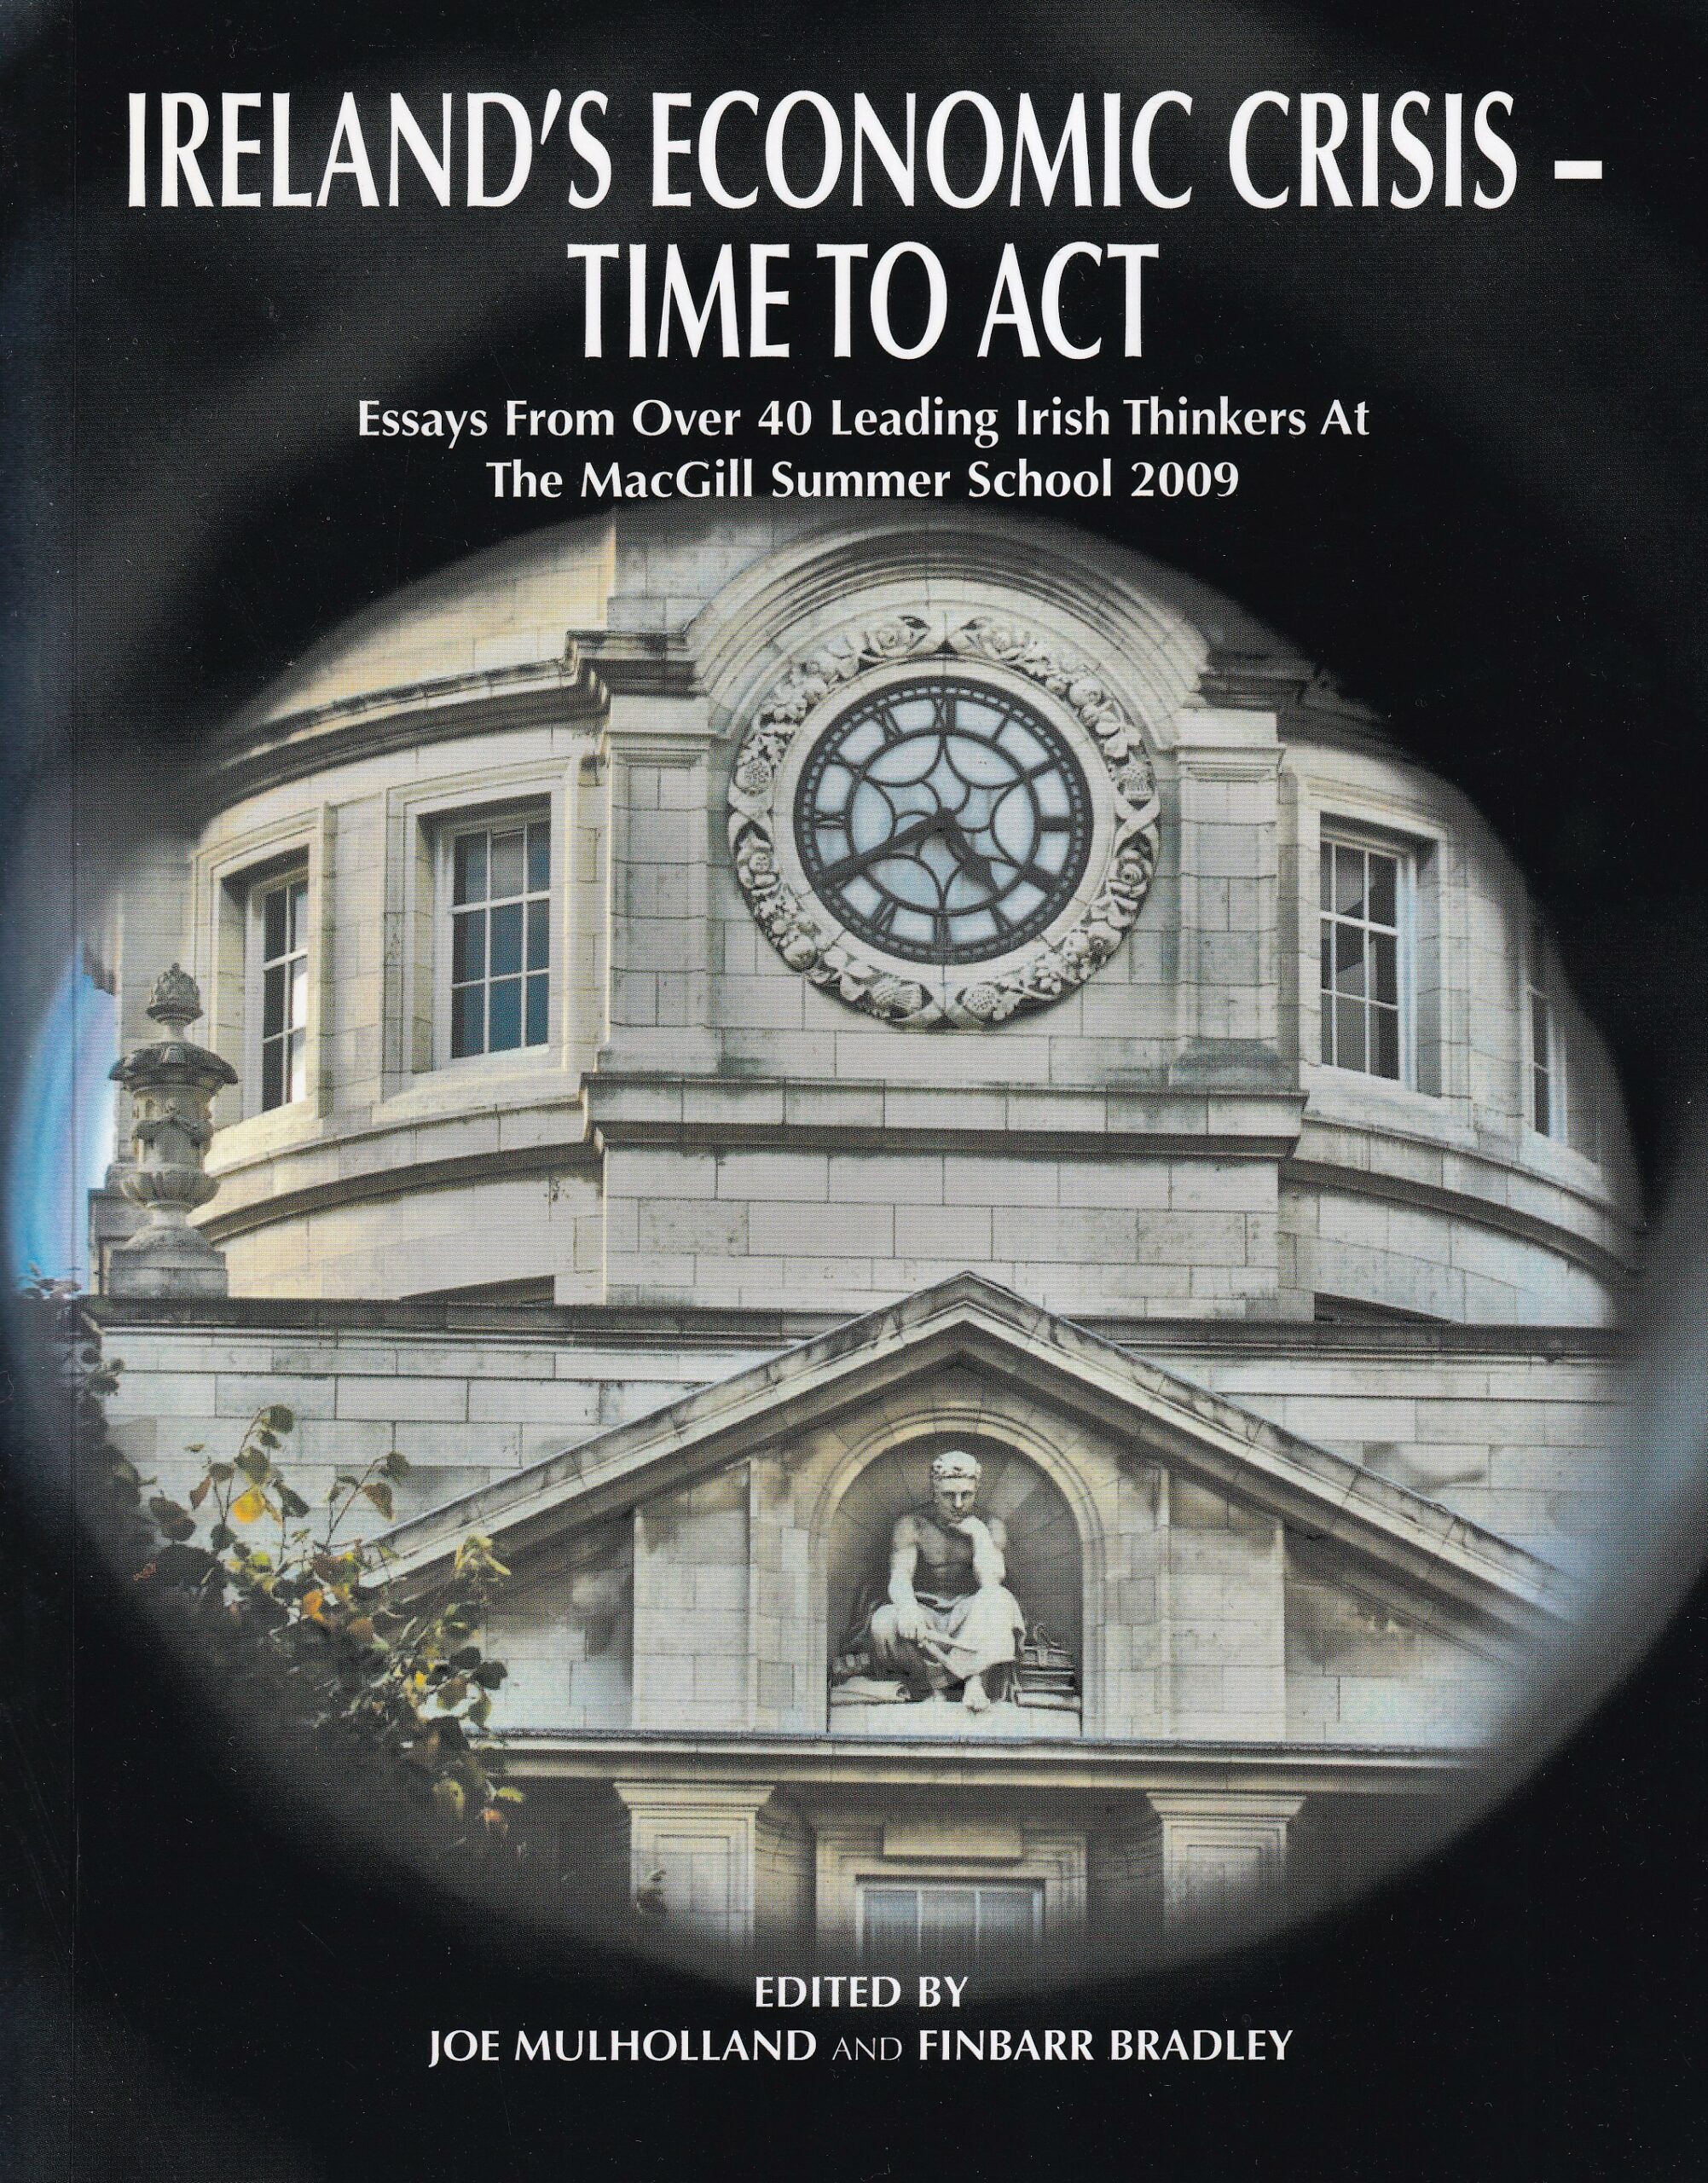 Ireland’s Economic Crisis- Time to Act: Essays from Over 40 Leading Irish Thinkers at the MacGill Summer School 2009 | Joe Mulholland and Finbar Bradley (eds.) | Charlie Byrne's